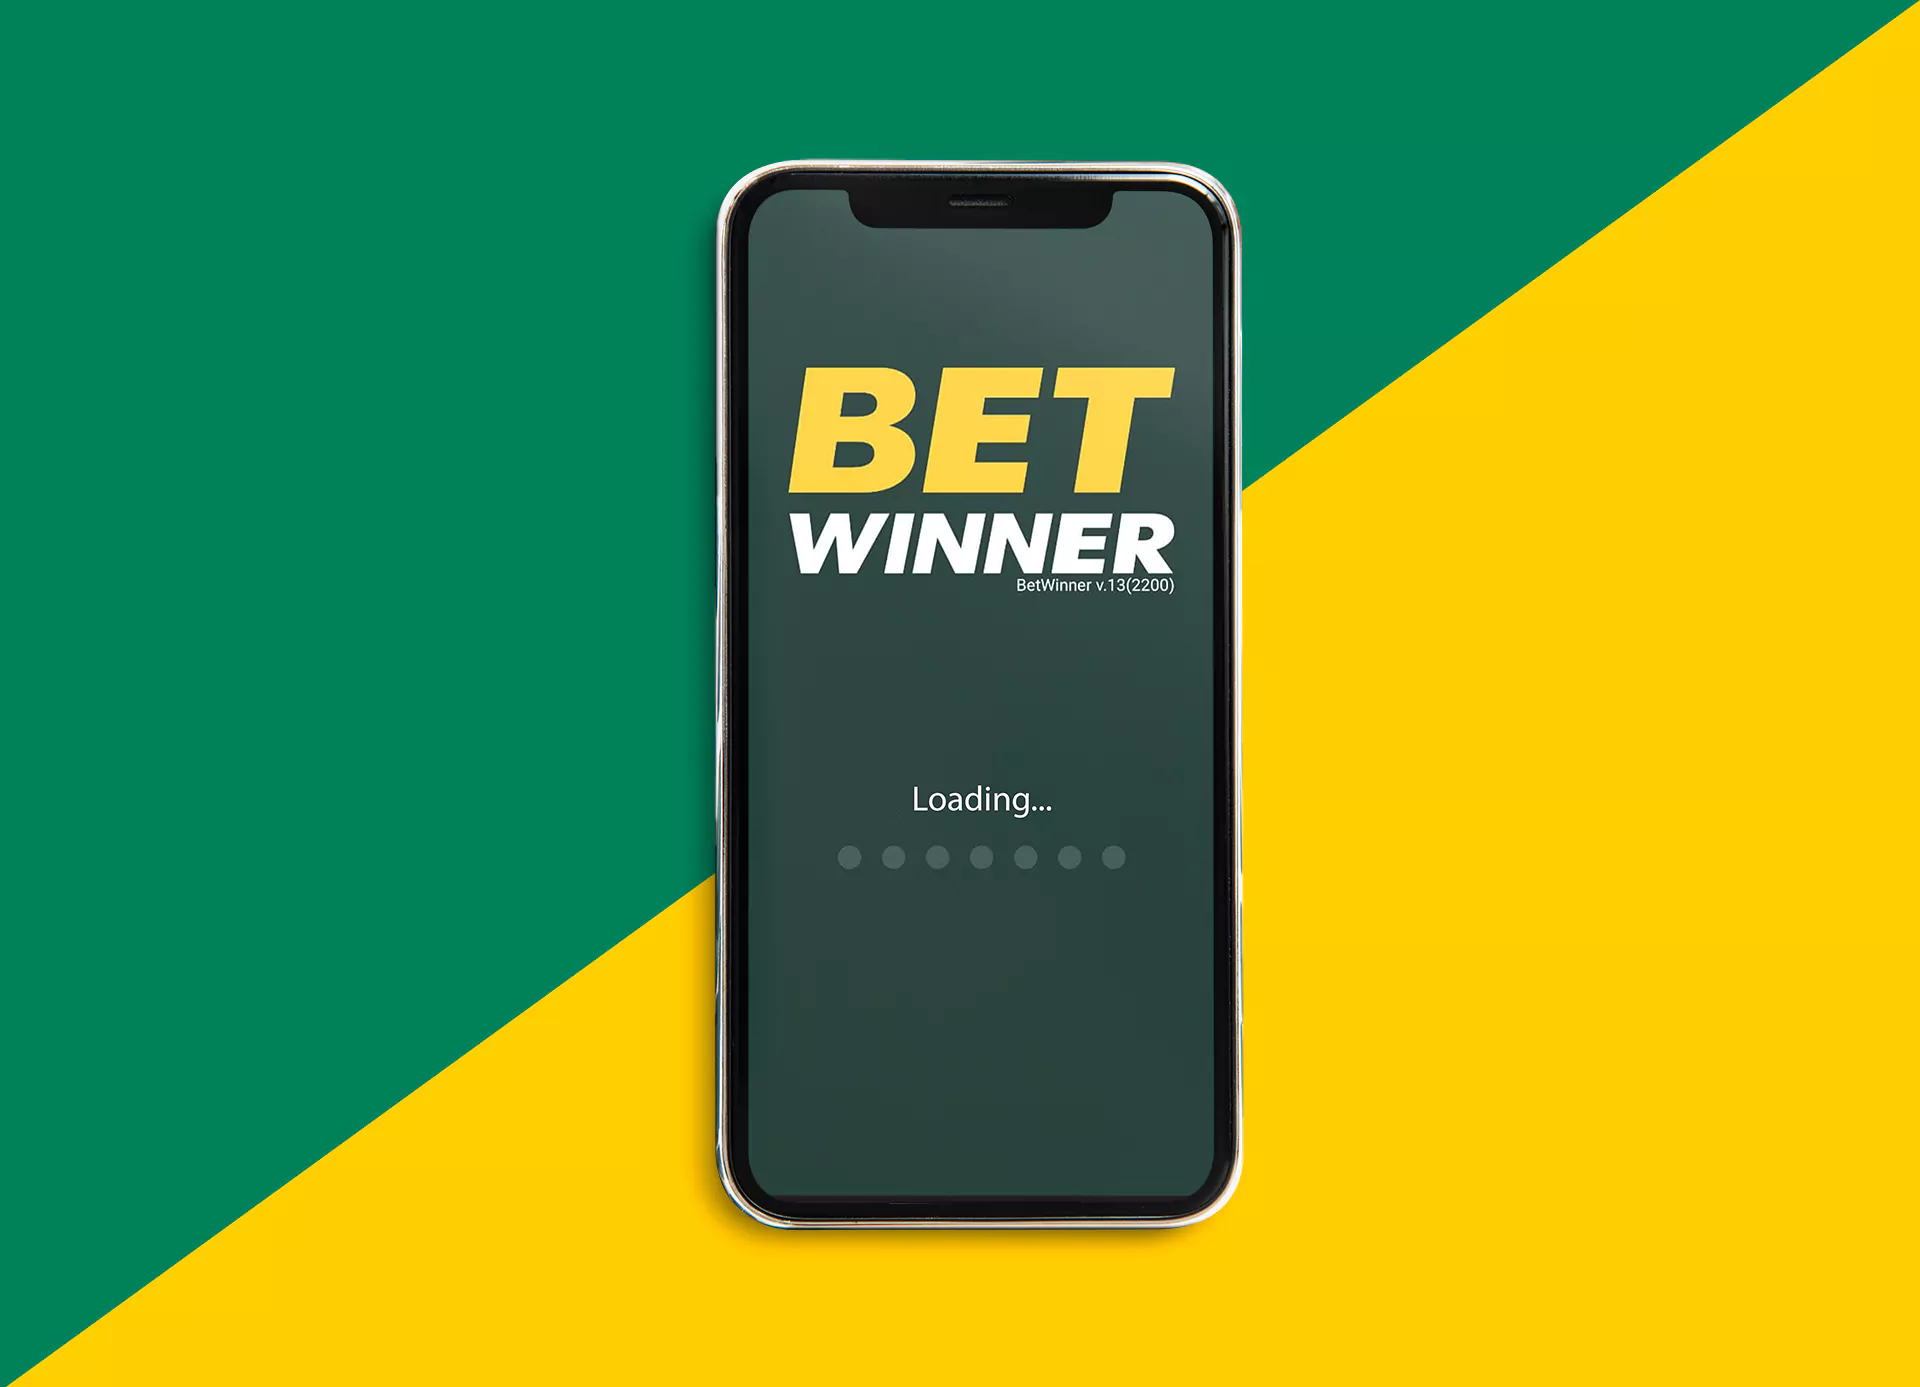 Want To Step Up Your Betwinner Burkina Faso? You Need To Read This First